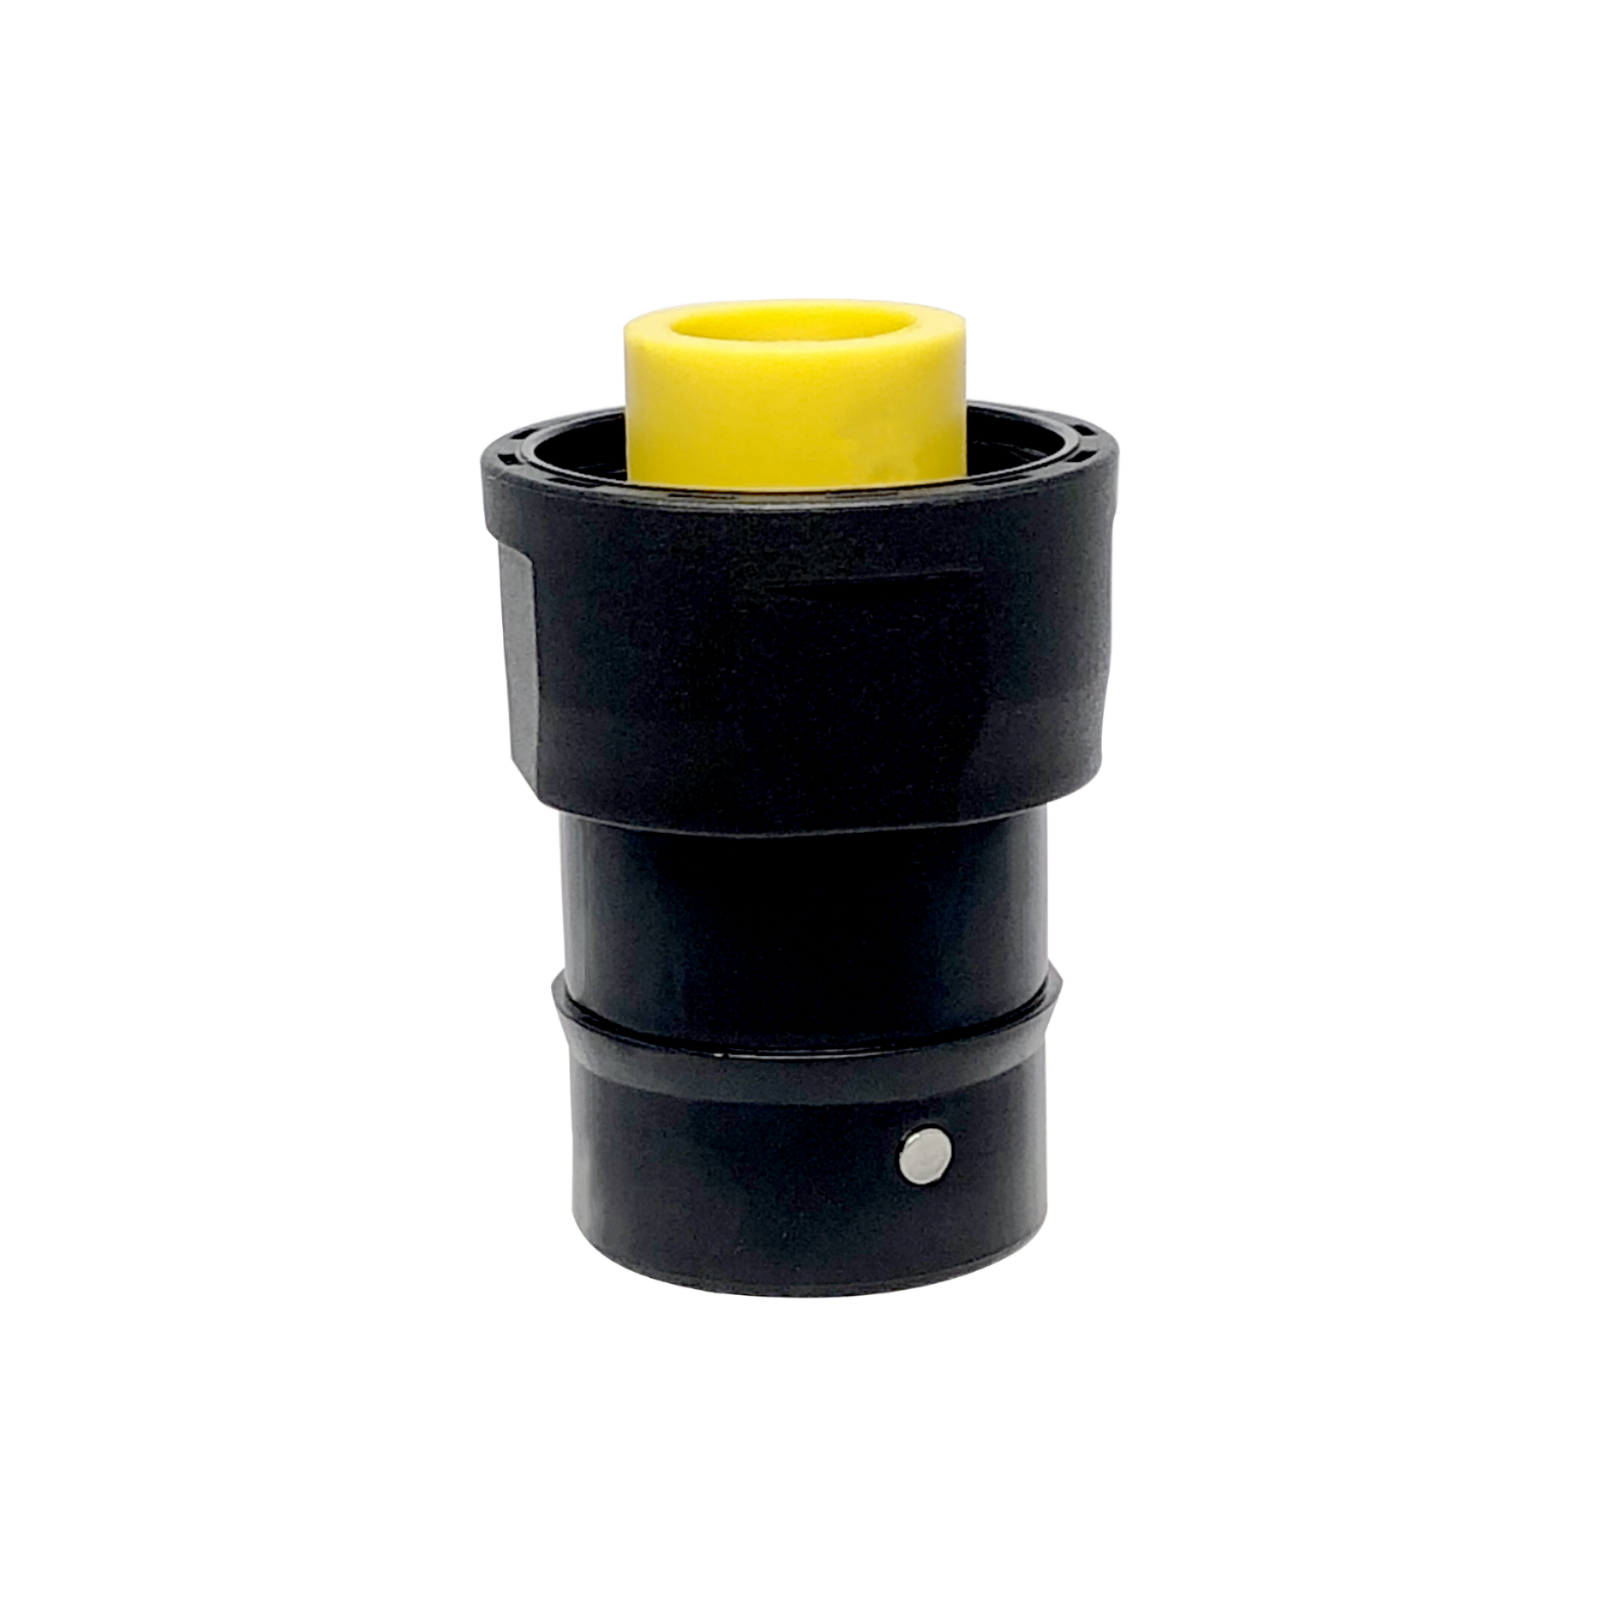 IFO-38A ADAPTOR FOR INFLATOR OCTOPUS